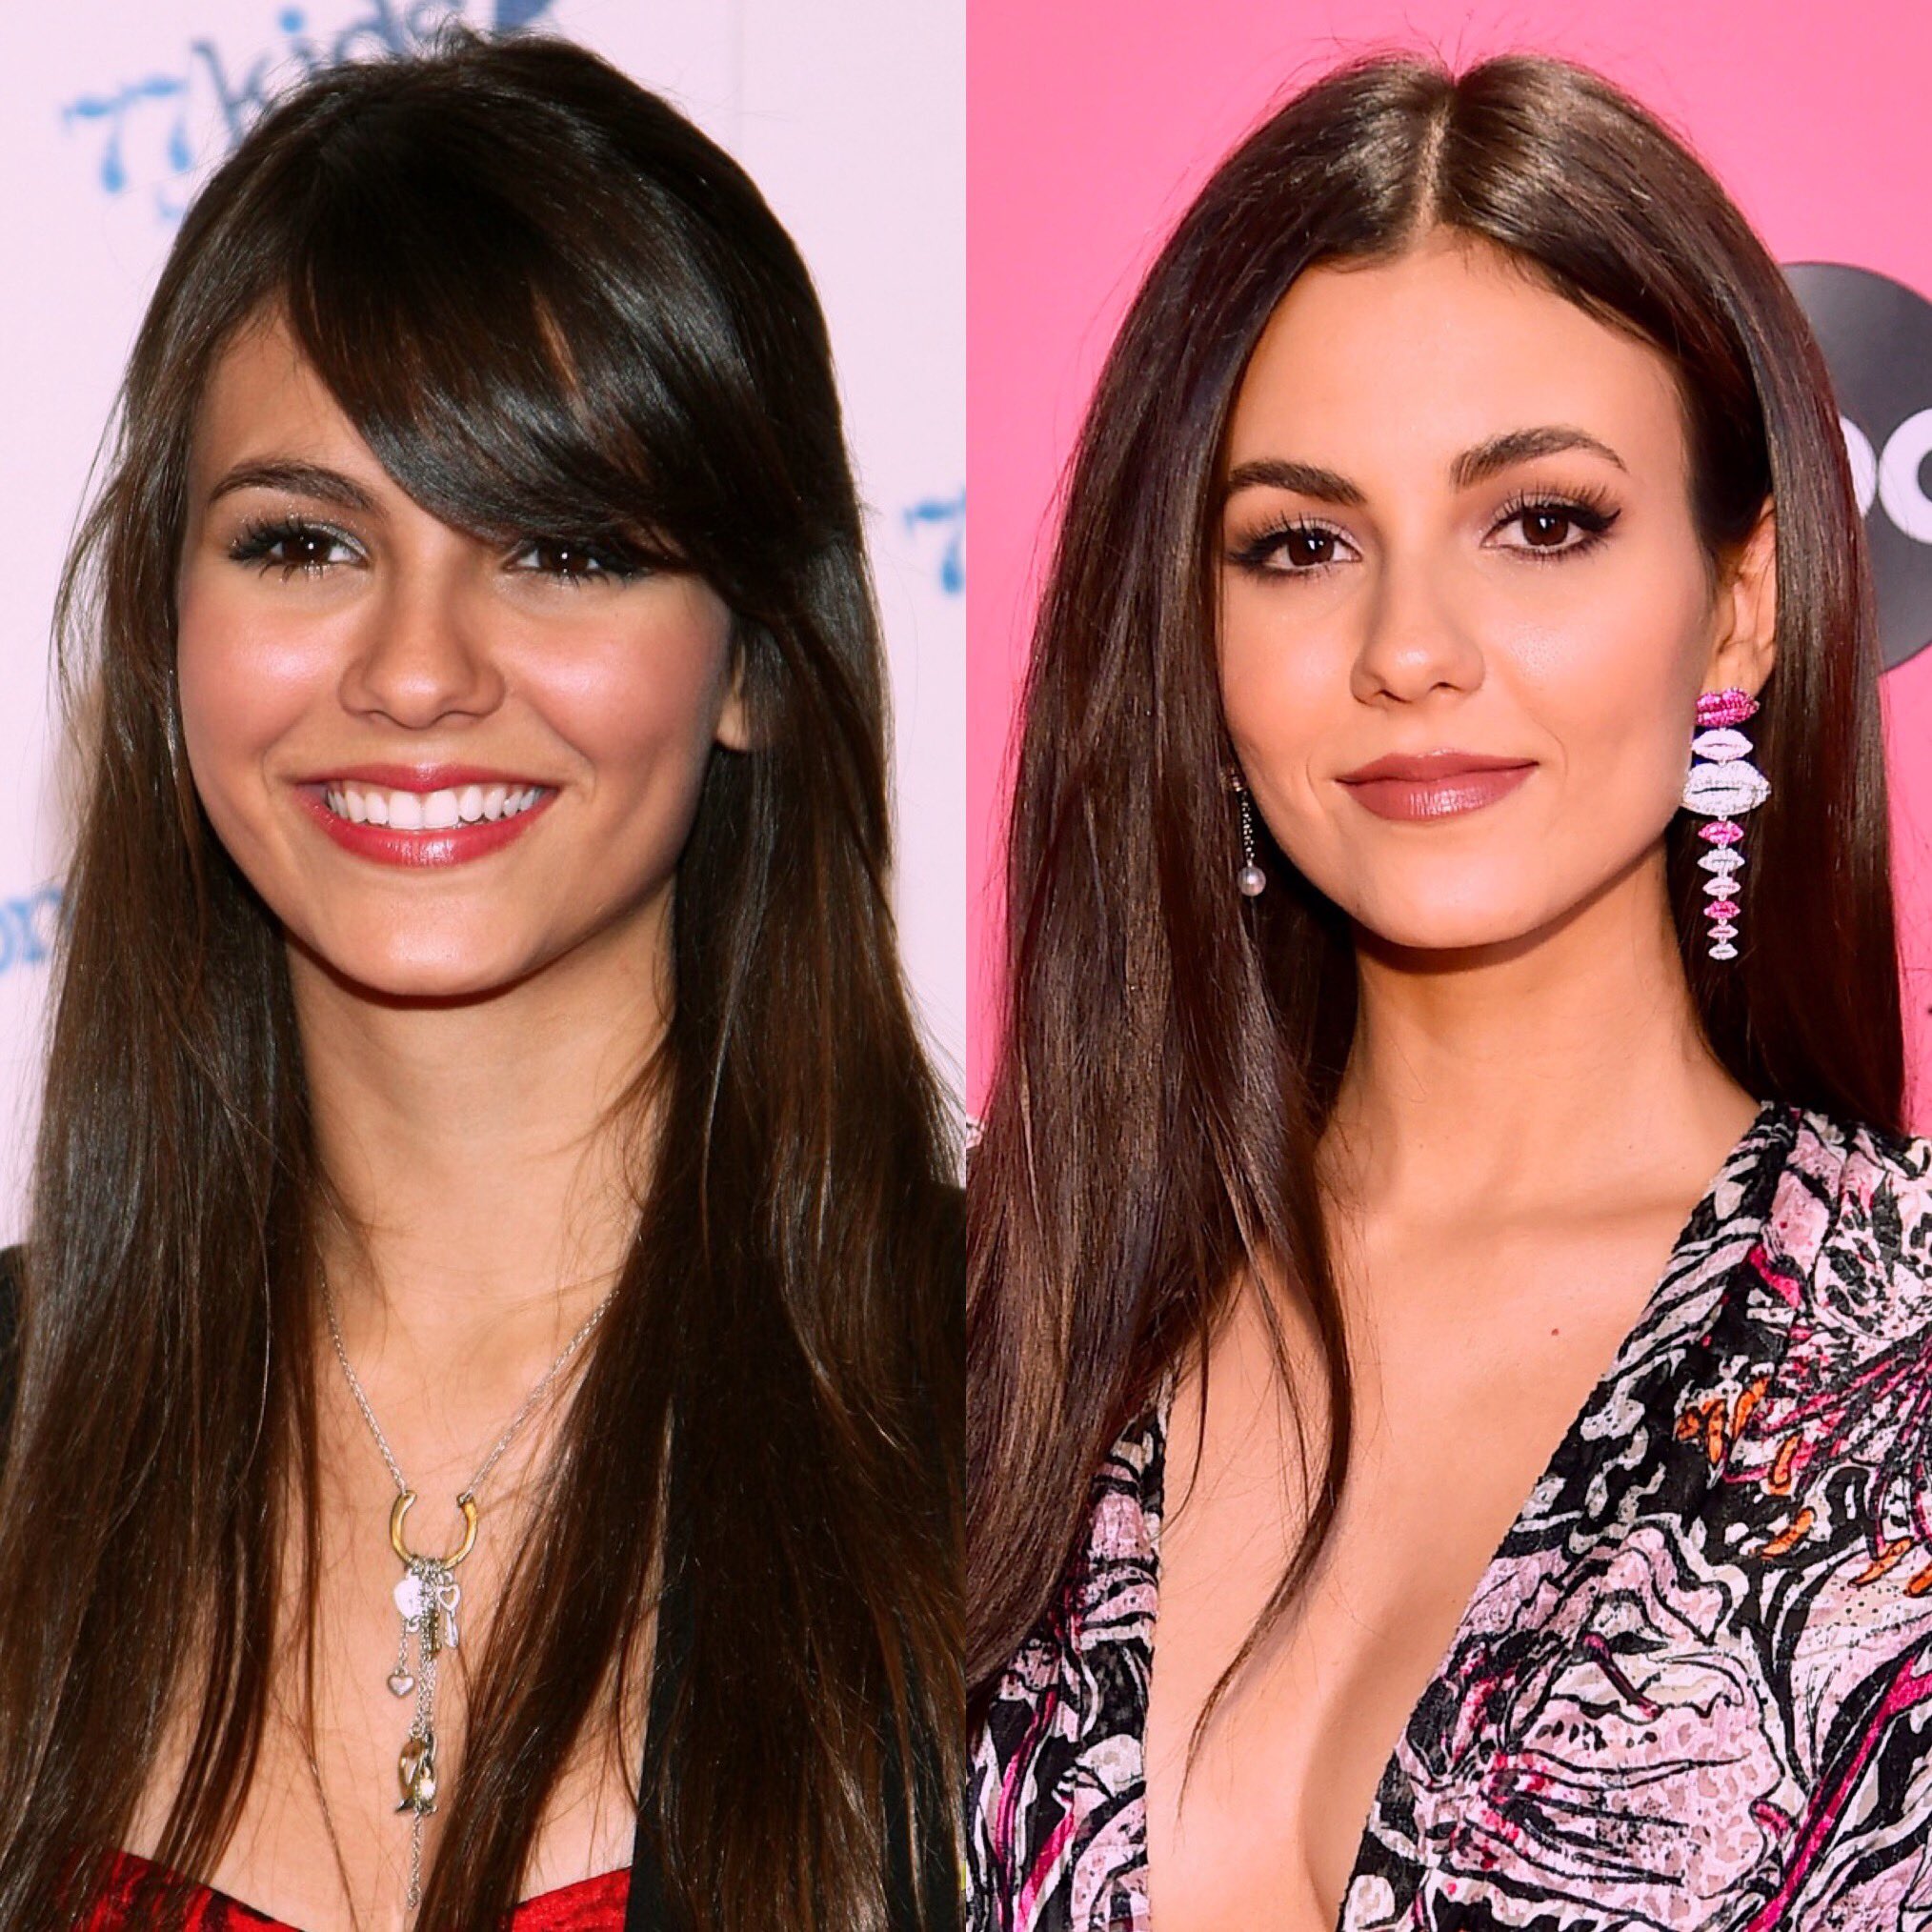 Victoria Justice on Twitter: "little Vic ðŸ’— #10yearchallenge. from pbs...